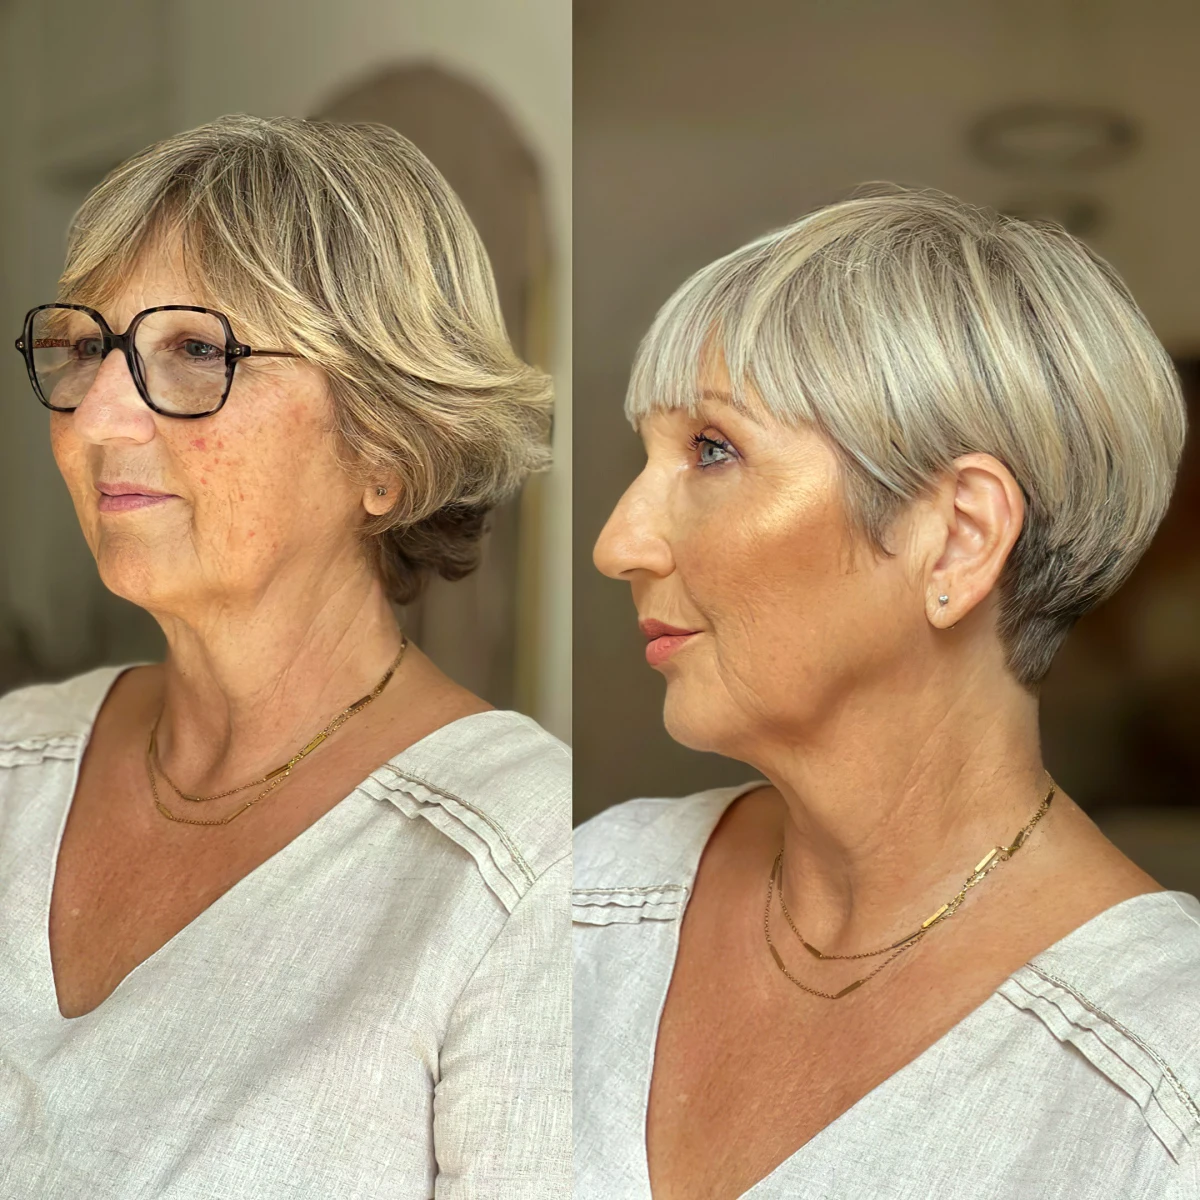 relooking coiffure femme 50 ans cheveux courts lunettes